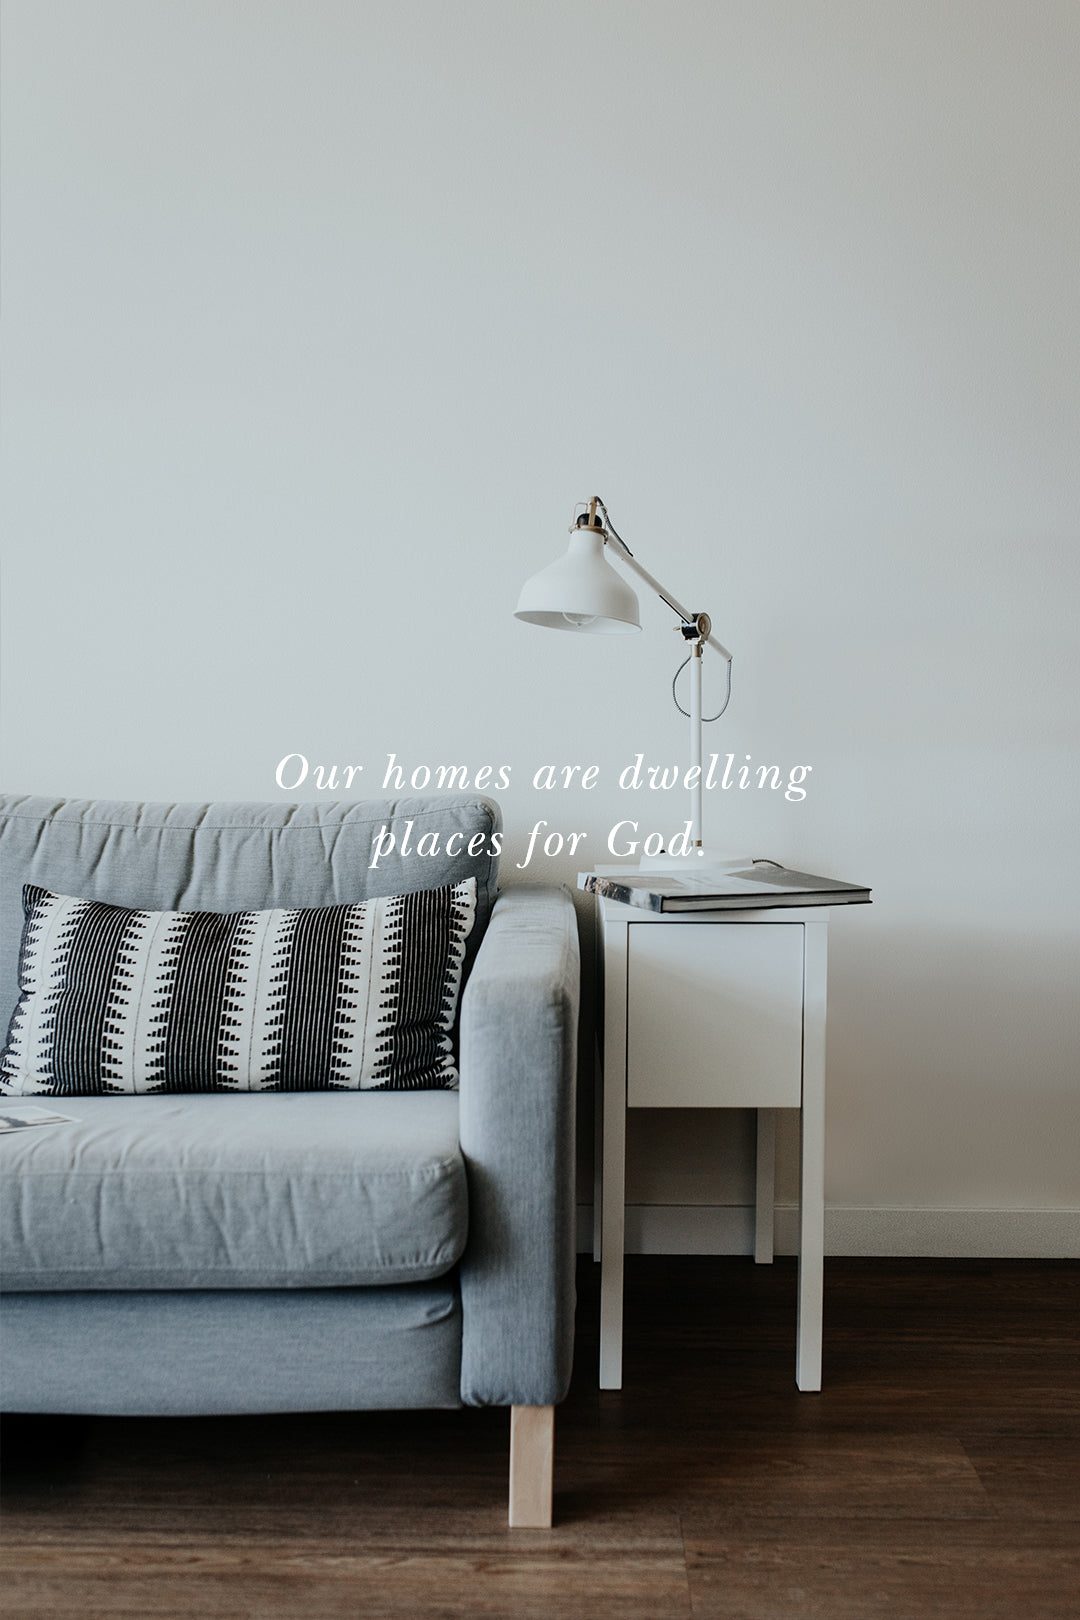 How Lovely Is Your Dwelling Place?